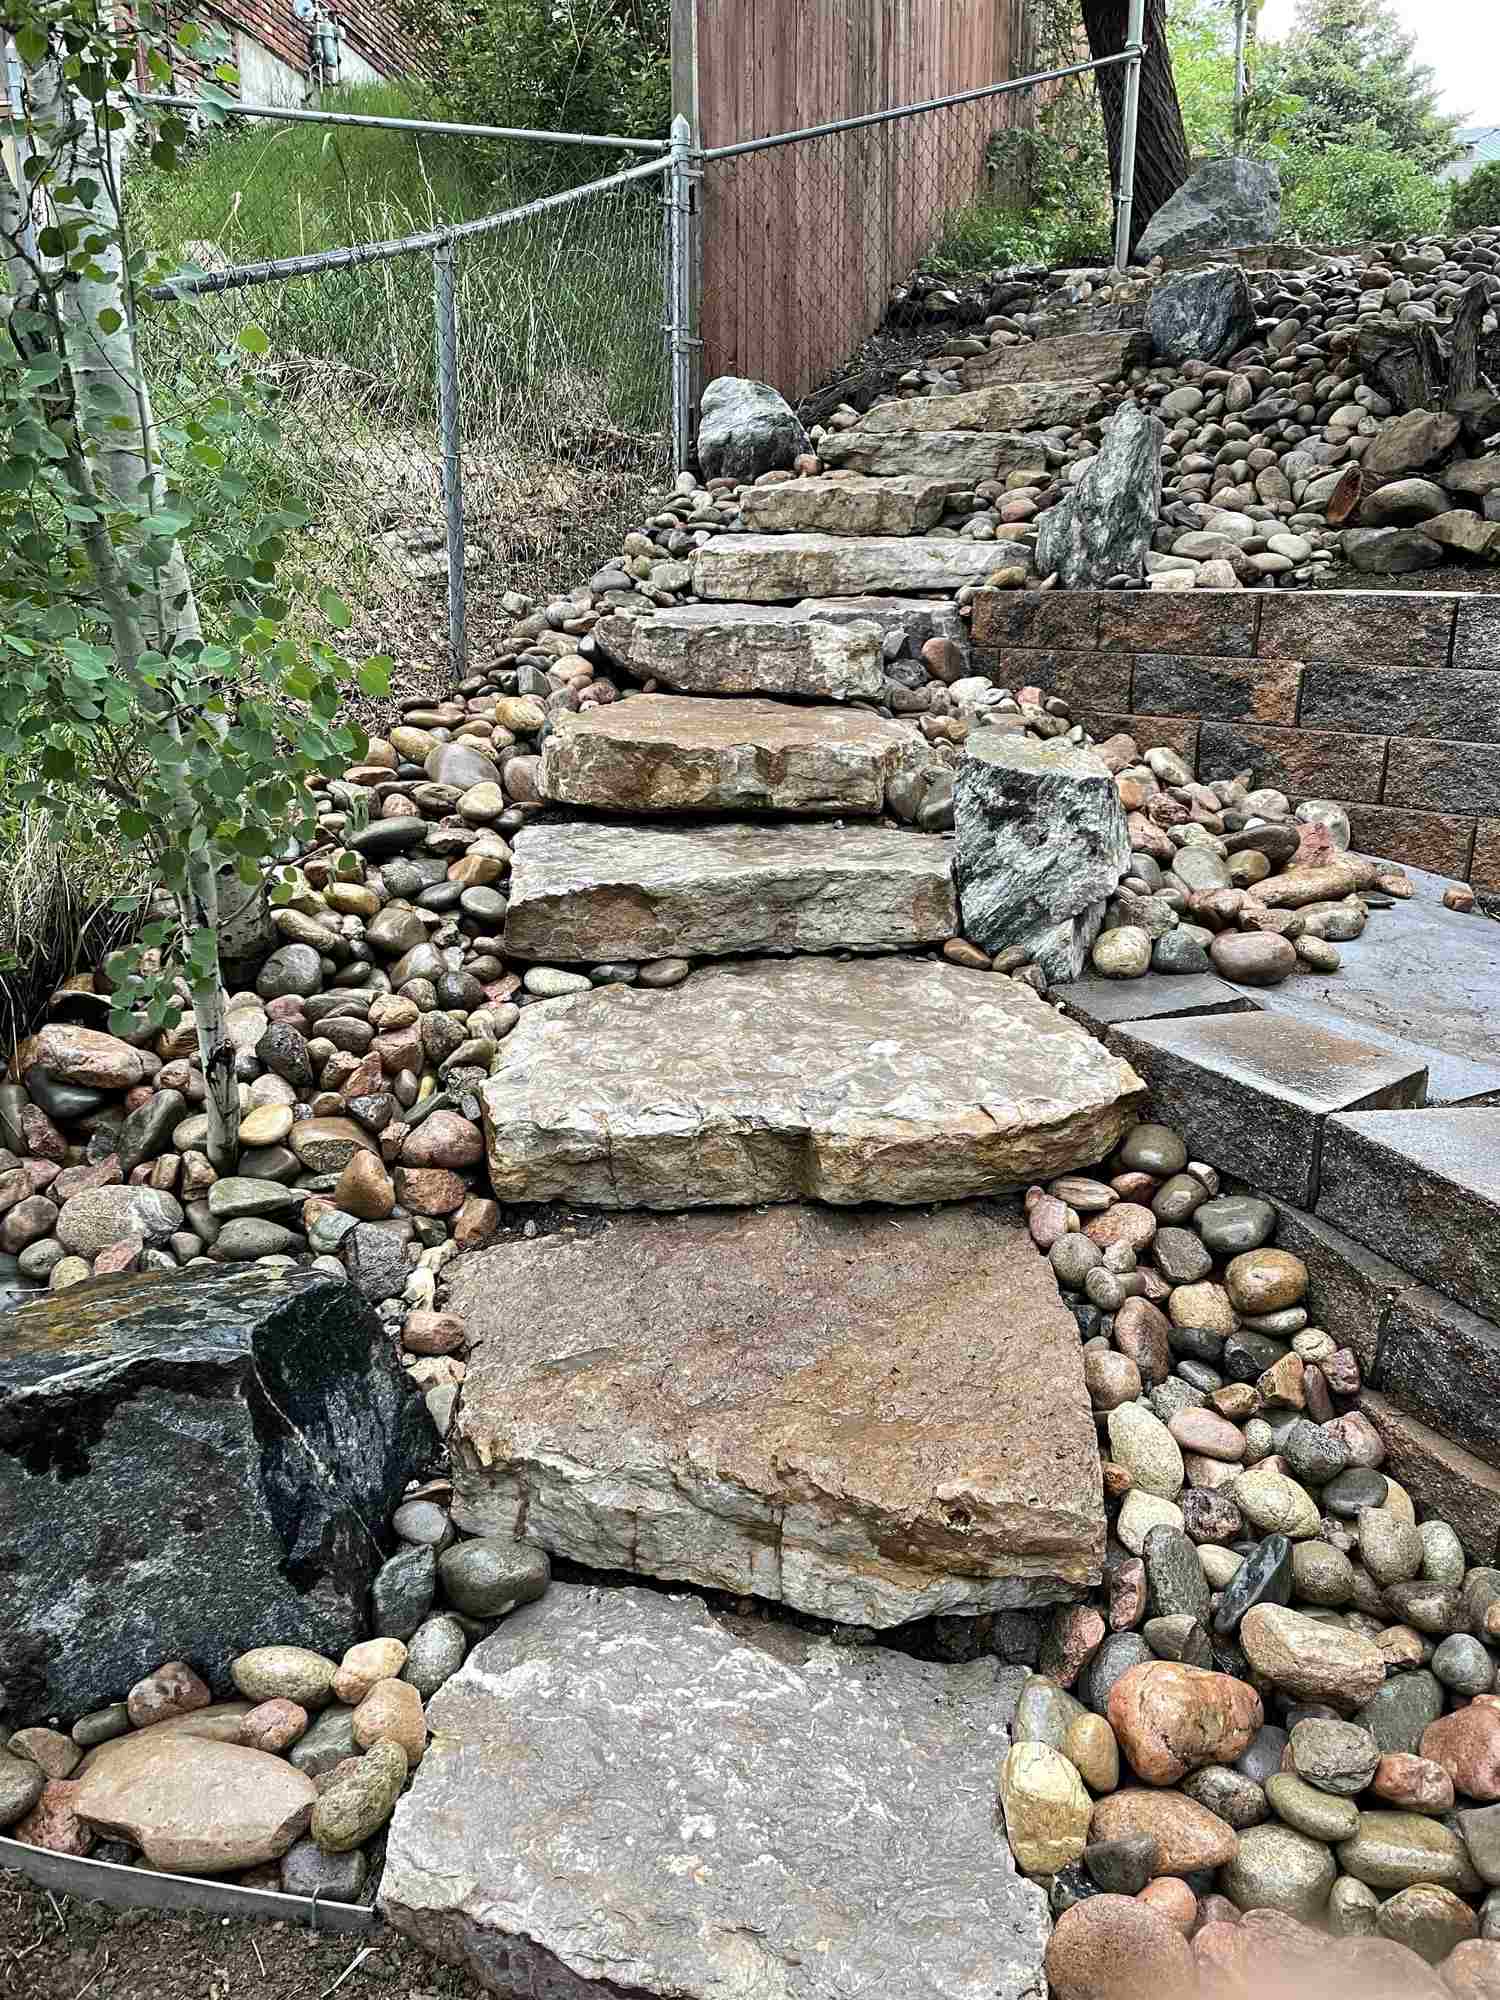 Premier Xeriscaping Options For Colorado Landscapes